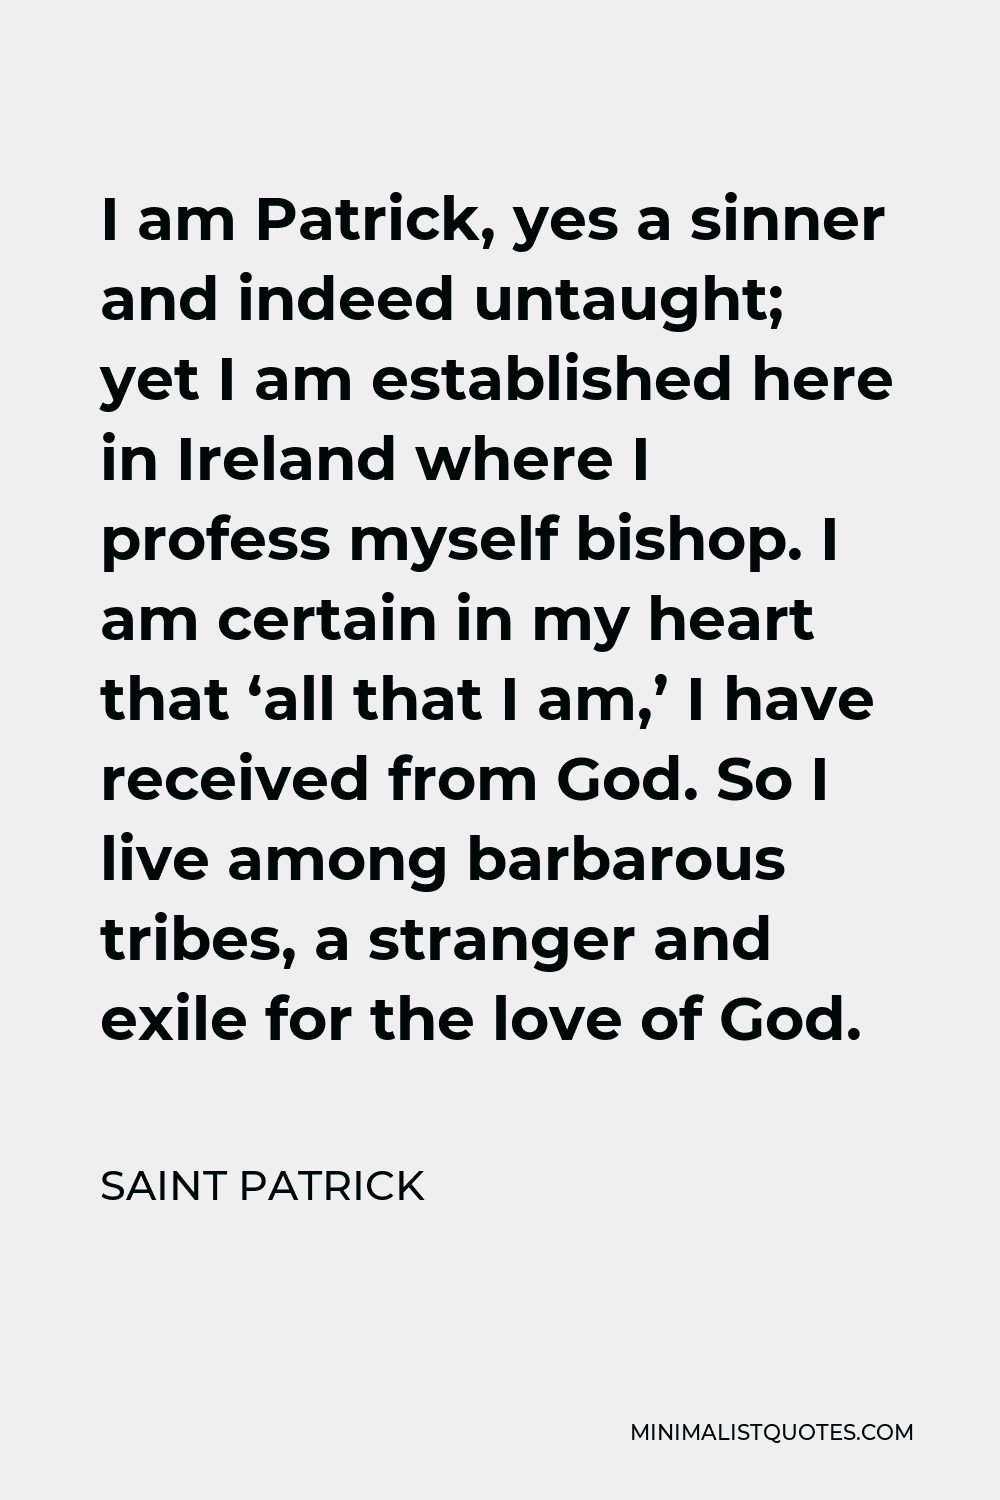 Saint Patrick Quote - I am Patrick, yes a sinner and indeed untaught; yet I am established here in Ireland where I profess myself bishop. I am certain in my heart that ‘all that I am,’ I have received from God. So I live among barbarous tribes, a stranger and exile for the love of God.